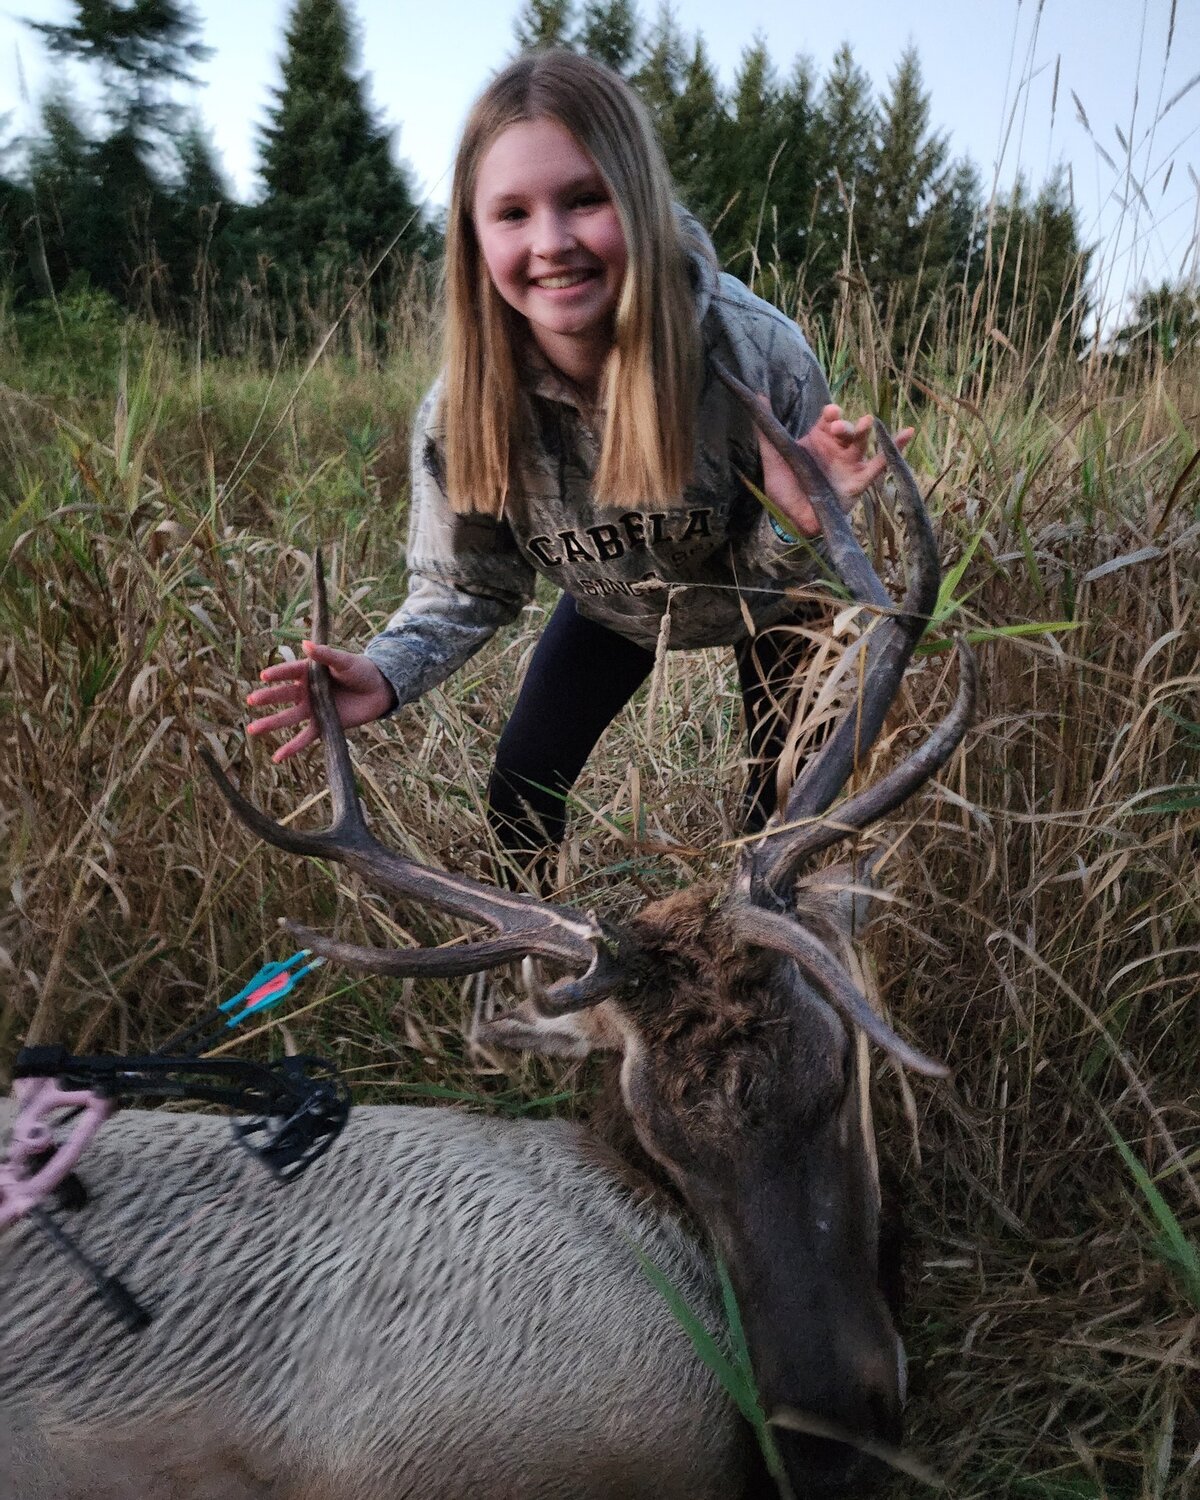 "Addisyn Olson filled her tags yesterday by bagging this amazing 6x7 bull and a deer the same evening during her first archery season in Centralia on her family’s property,” wrote Tonya Olson, who submitted this photo. The Chronicle publishes hunting and fishing photos, along with photos from other outdoor adventures in our area. To be included, send photos and information to news@chronline.com.